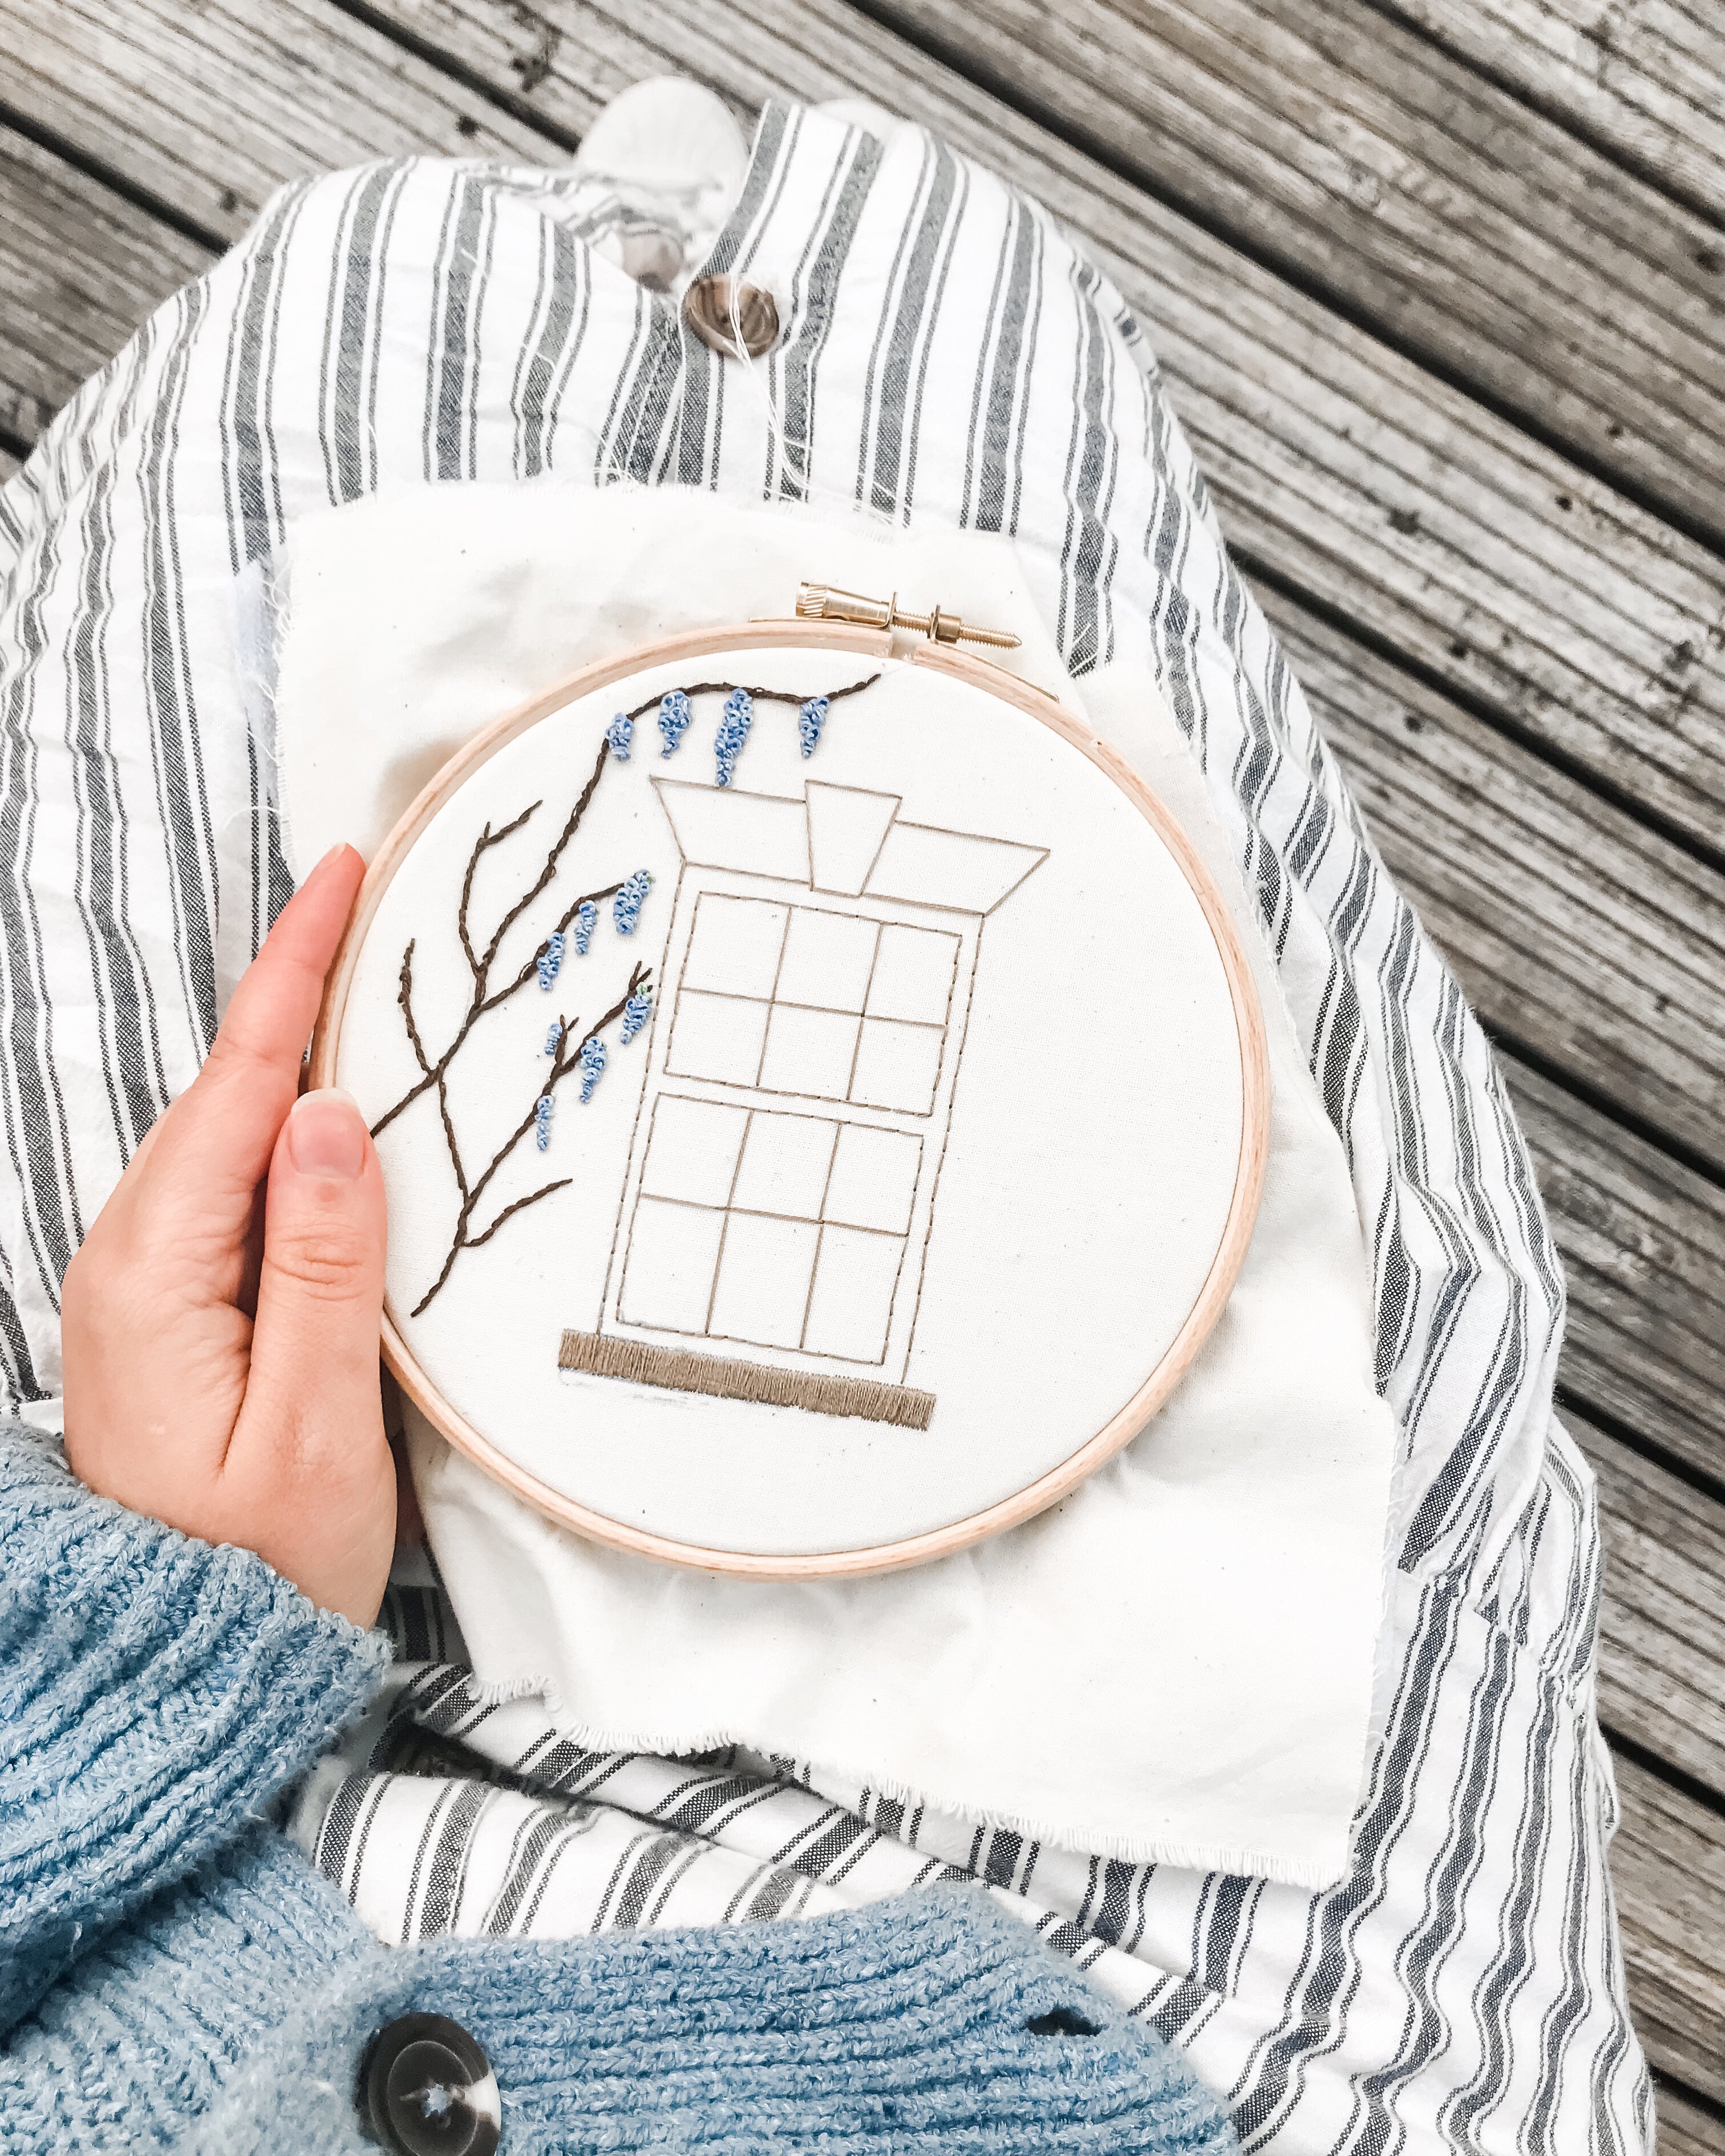 Self-care Sunday: Embroidery Workshop at Rawtenstall Market